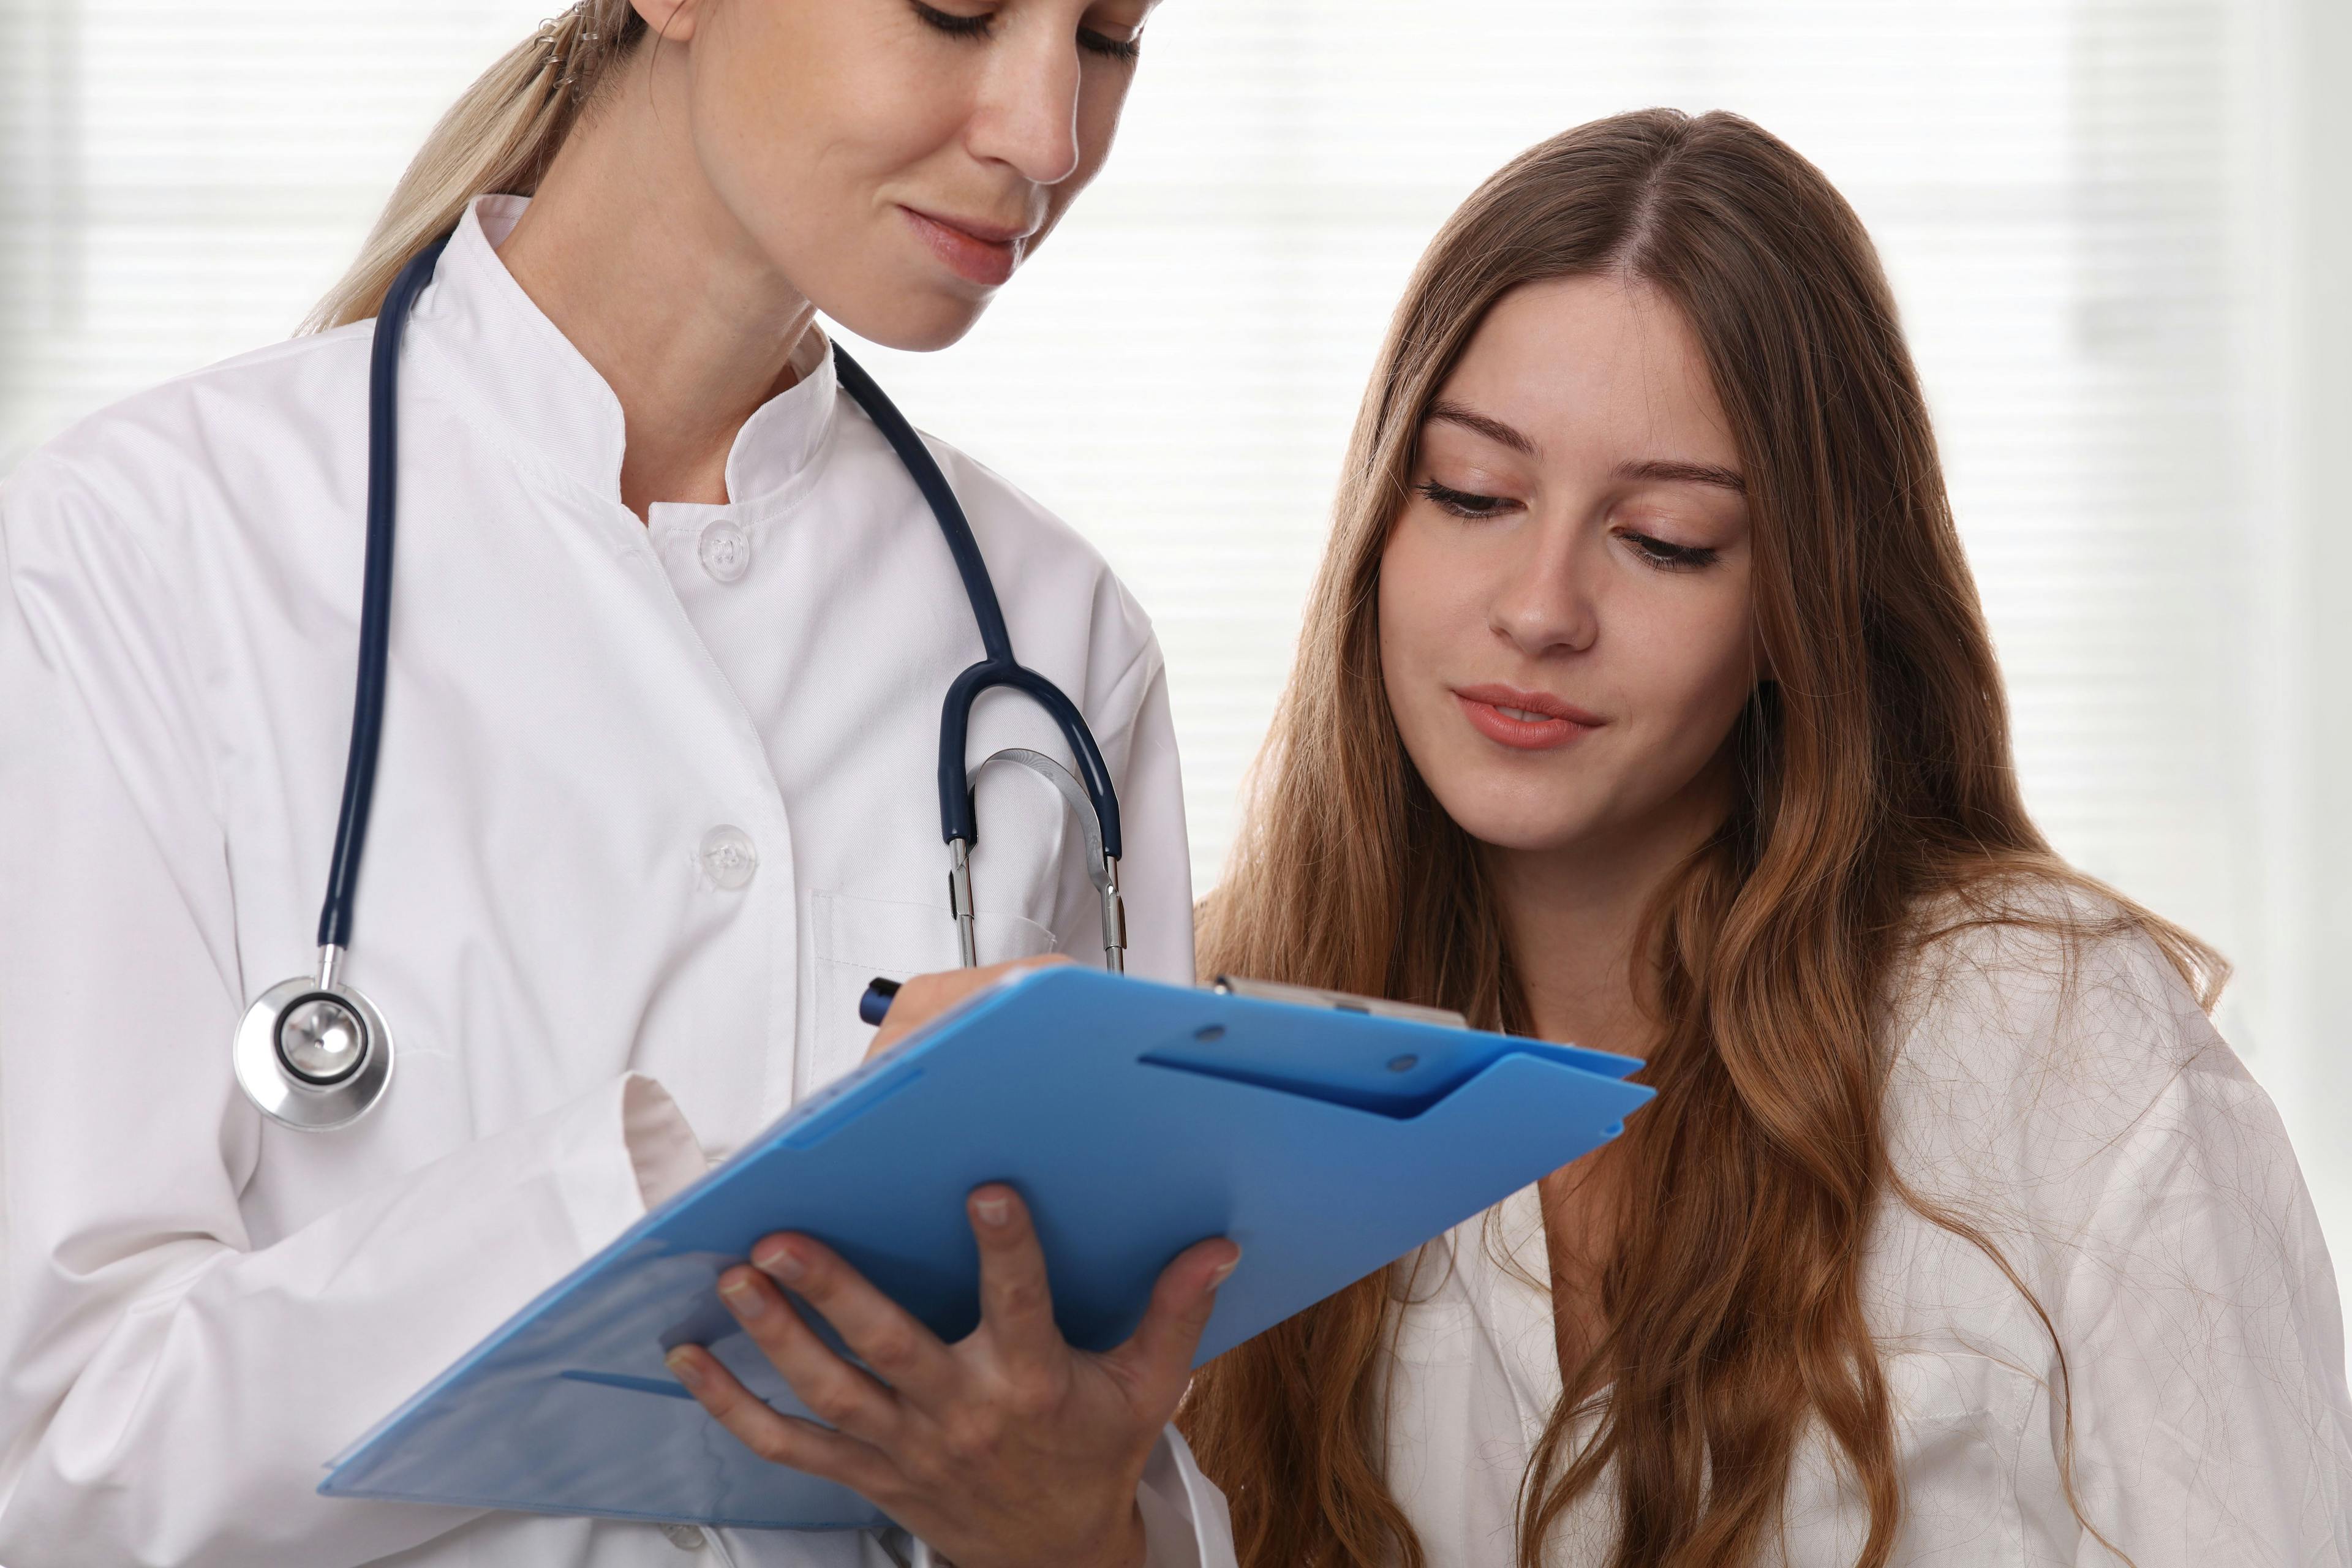 How physicians should talk to teens about sexual health